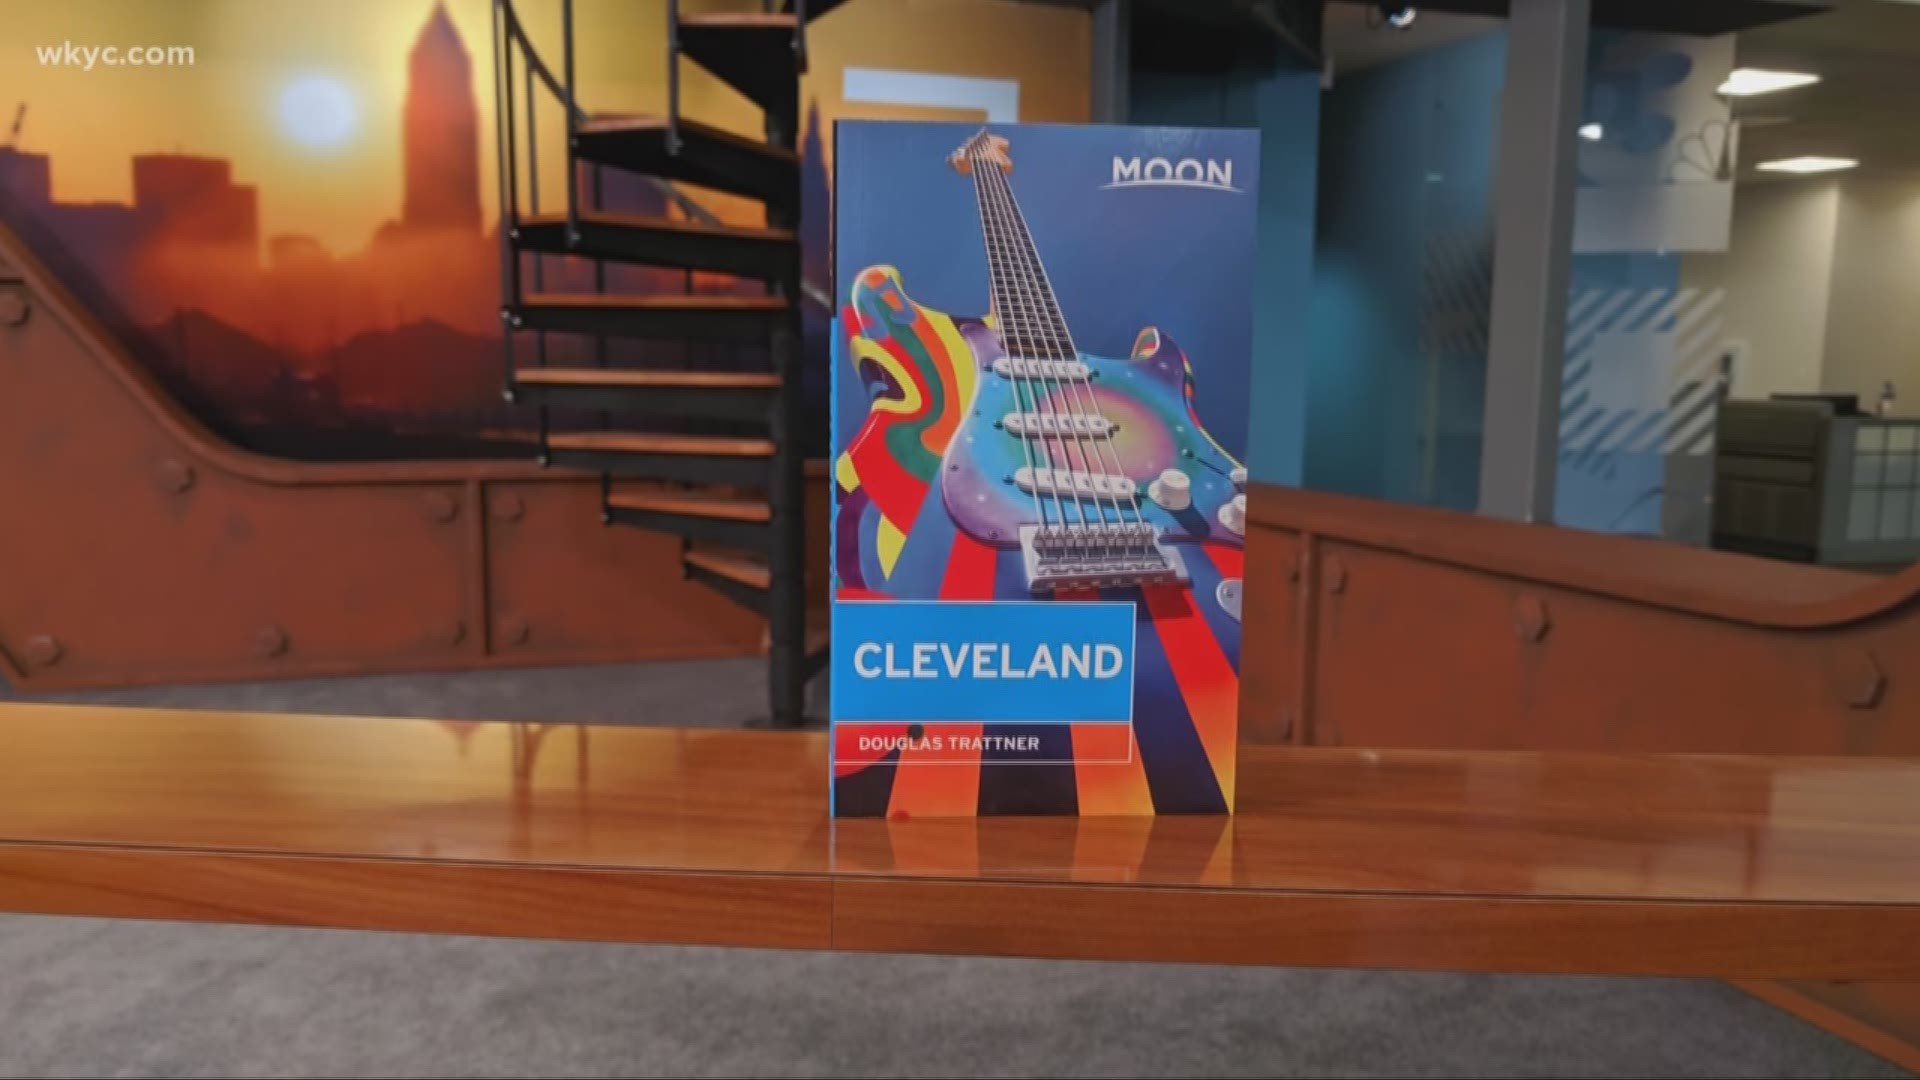 Exploring Cleveland's hidden gems in new guide